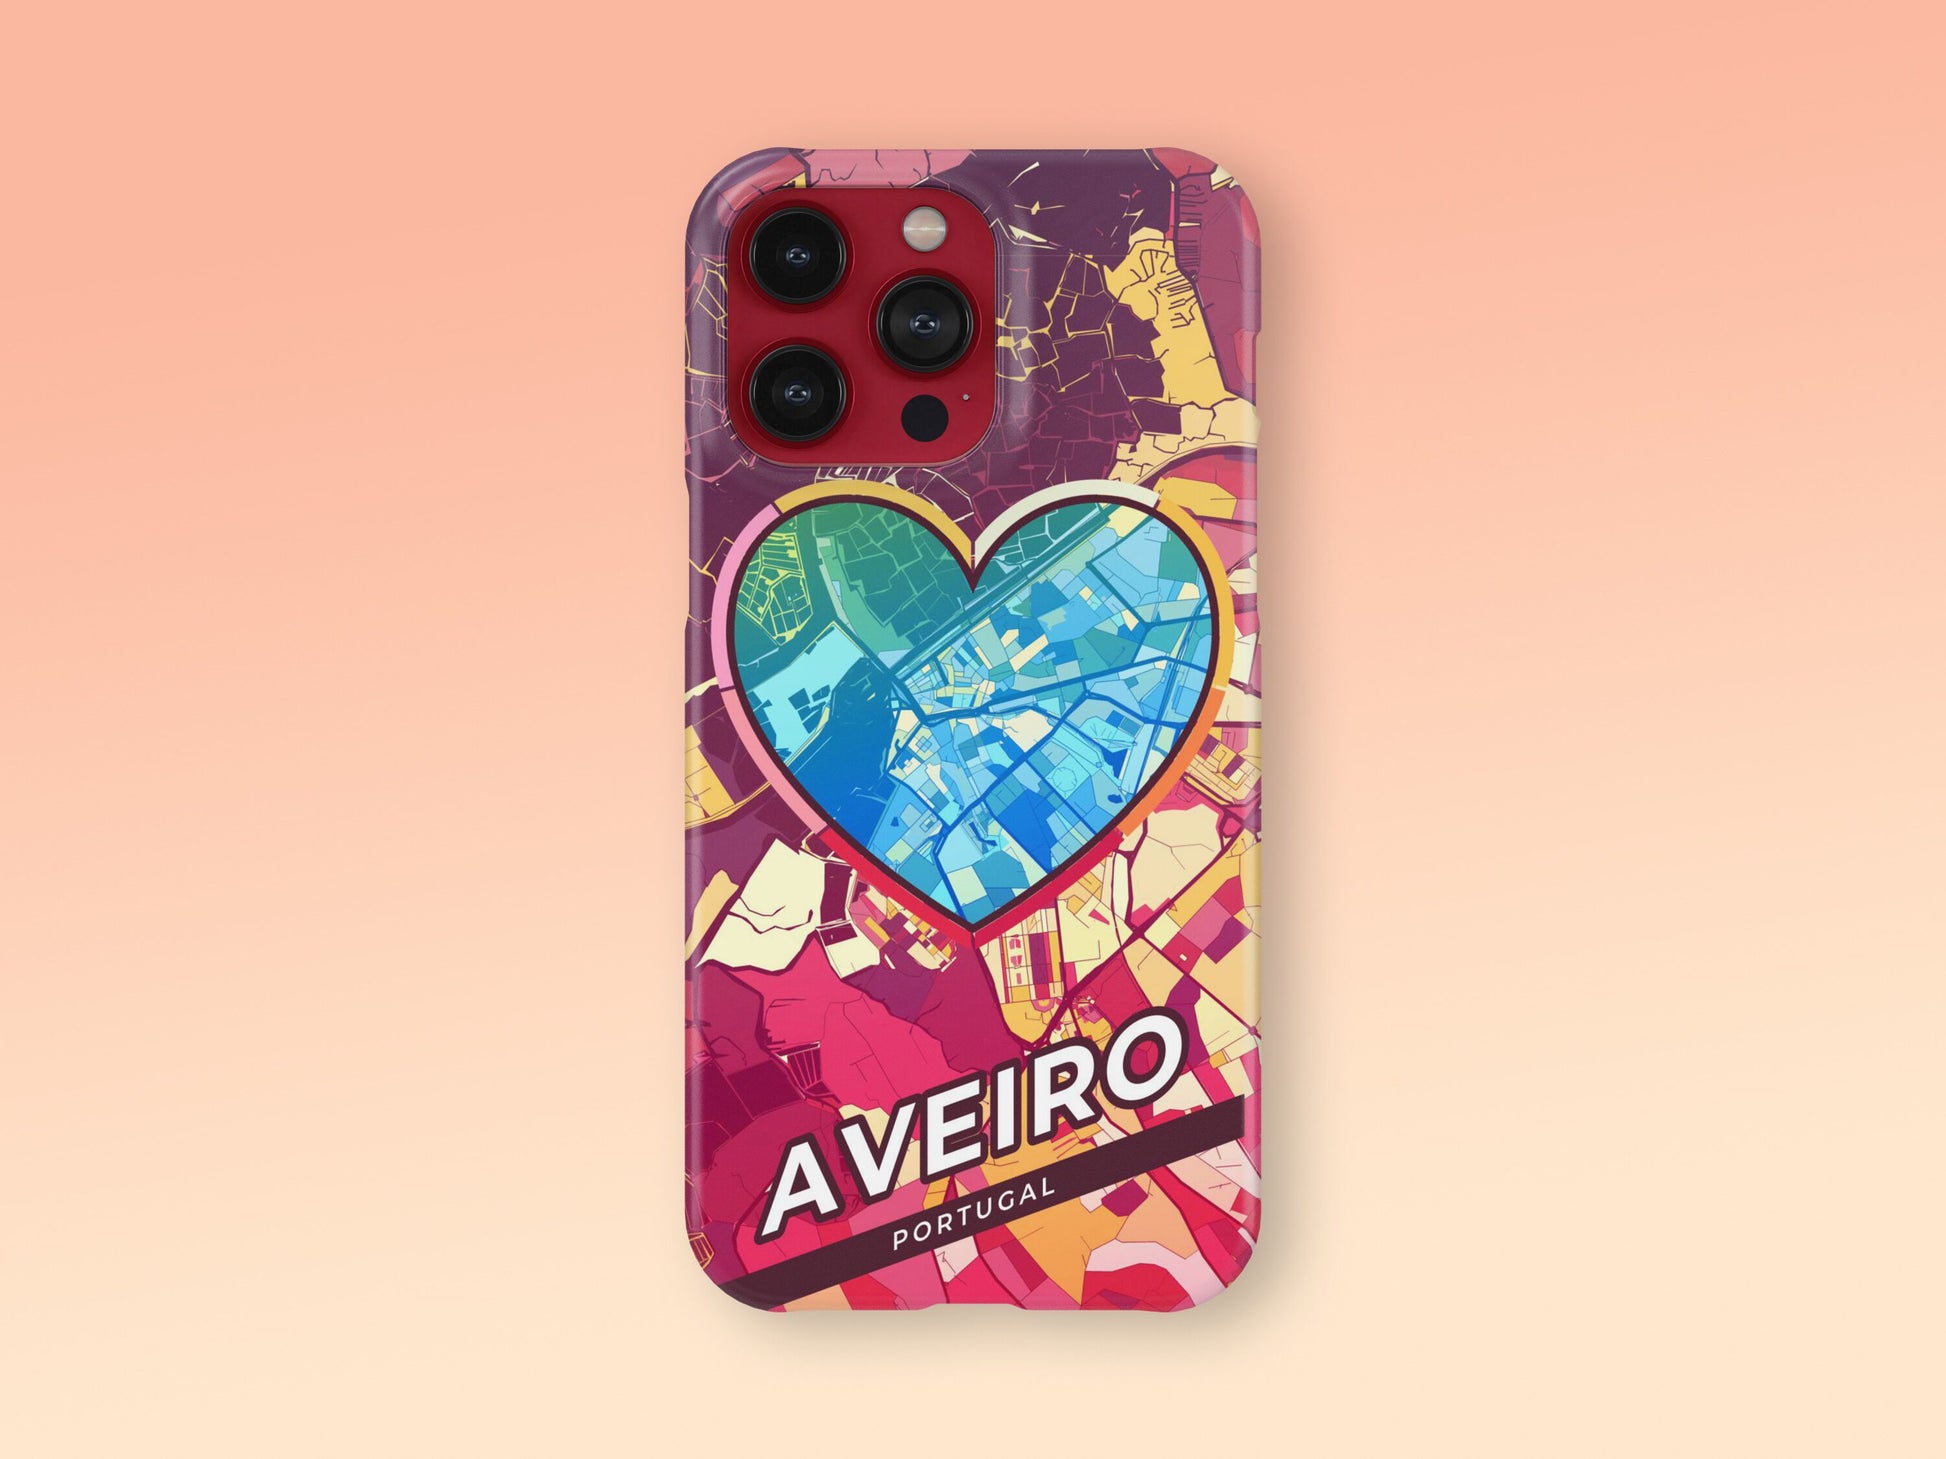 Aveiro Portugal slim phone case with colorful icon. Birthday, wedding or housewarming gift. Couple match cases. 2